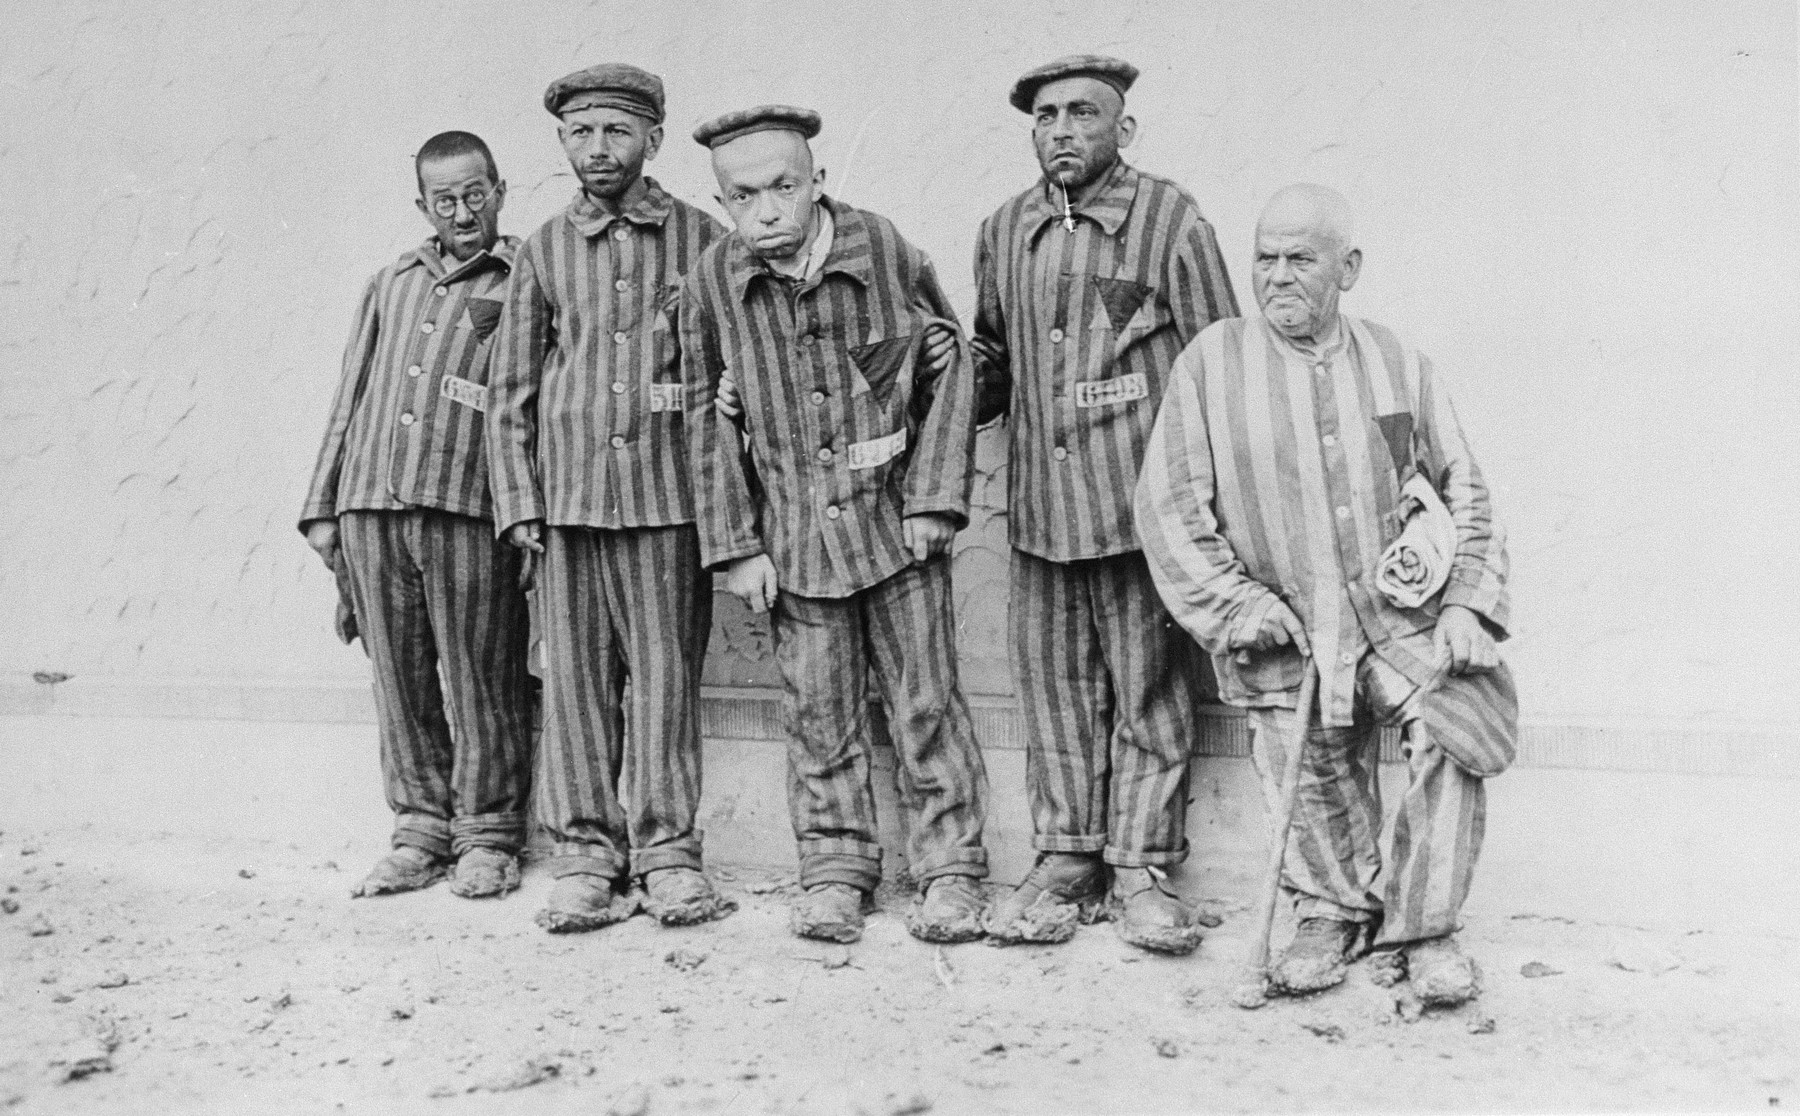 Developmentally disabled Jewish prisoners, photographed for propaganda purposes, who arrived in the Buchenwald concentration camp in Germany after Kristallnacht, 1938. Photo credit: USHMM #13132, courtesy of Robert A. Schmuhl